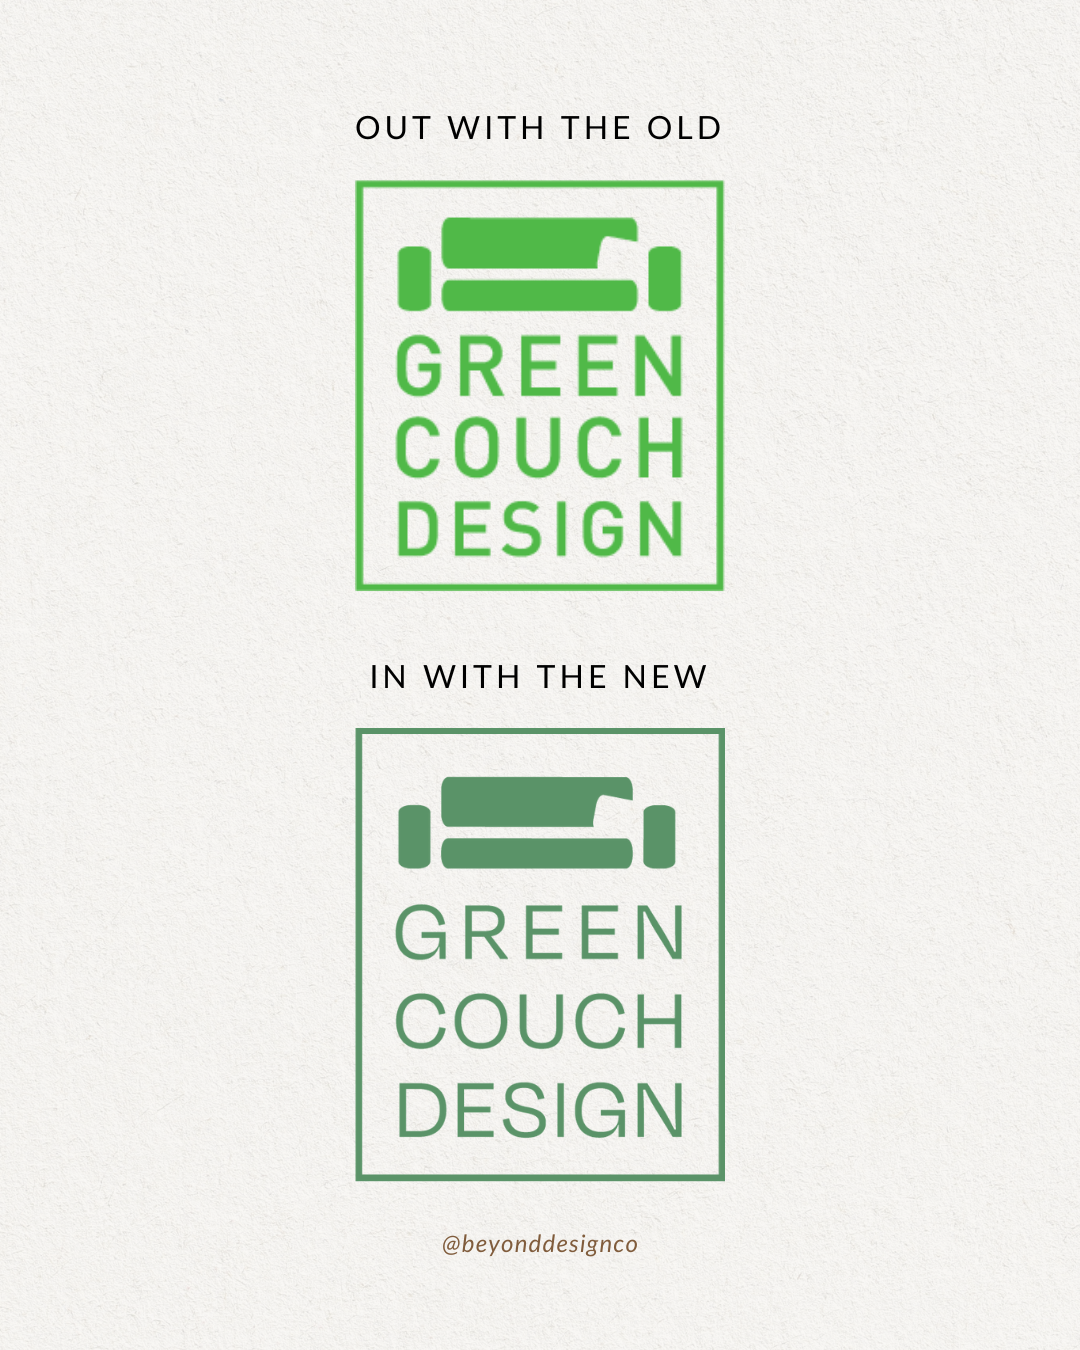 Beyond-Design-Co.-Green-Couch-Design-9.png